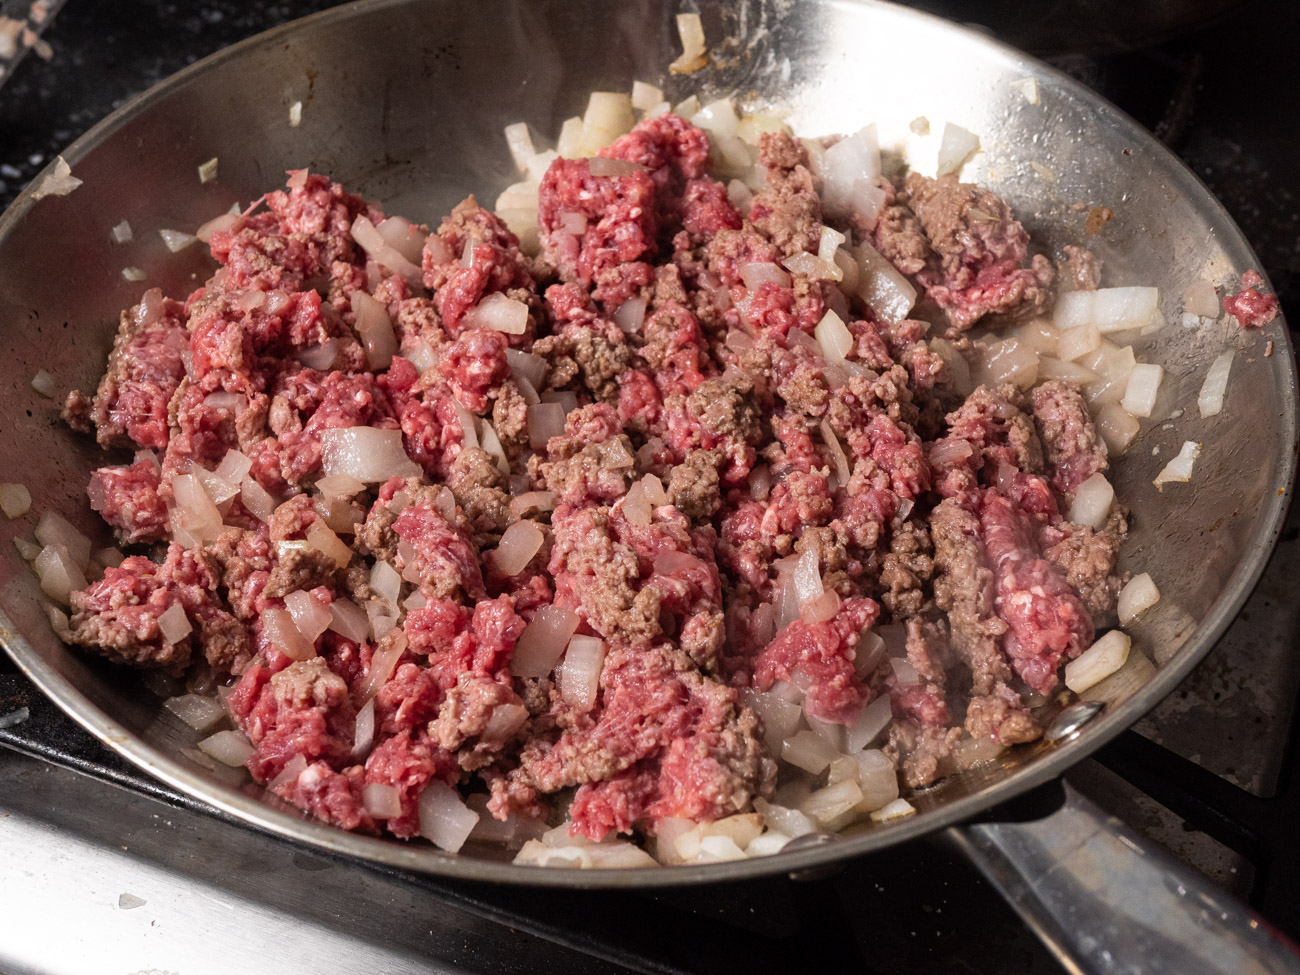 Add ground beef to skillet, cooking until no red remains in the beef.